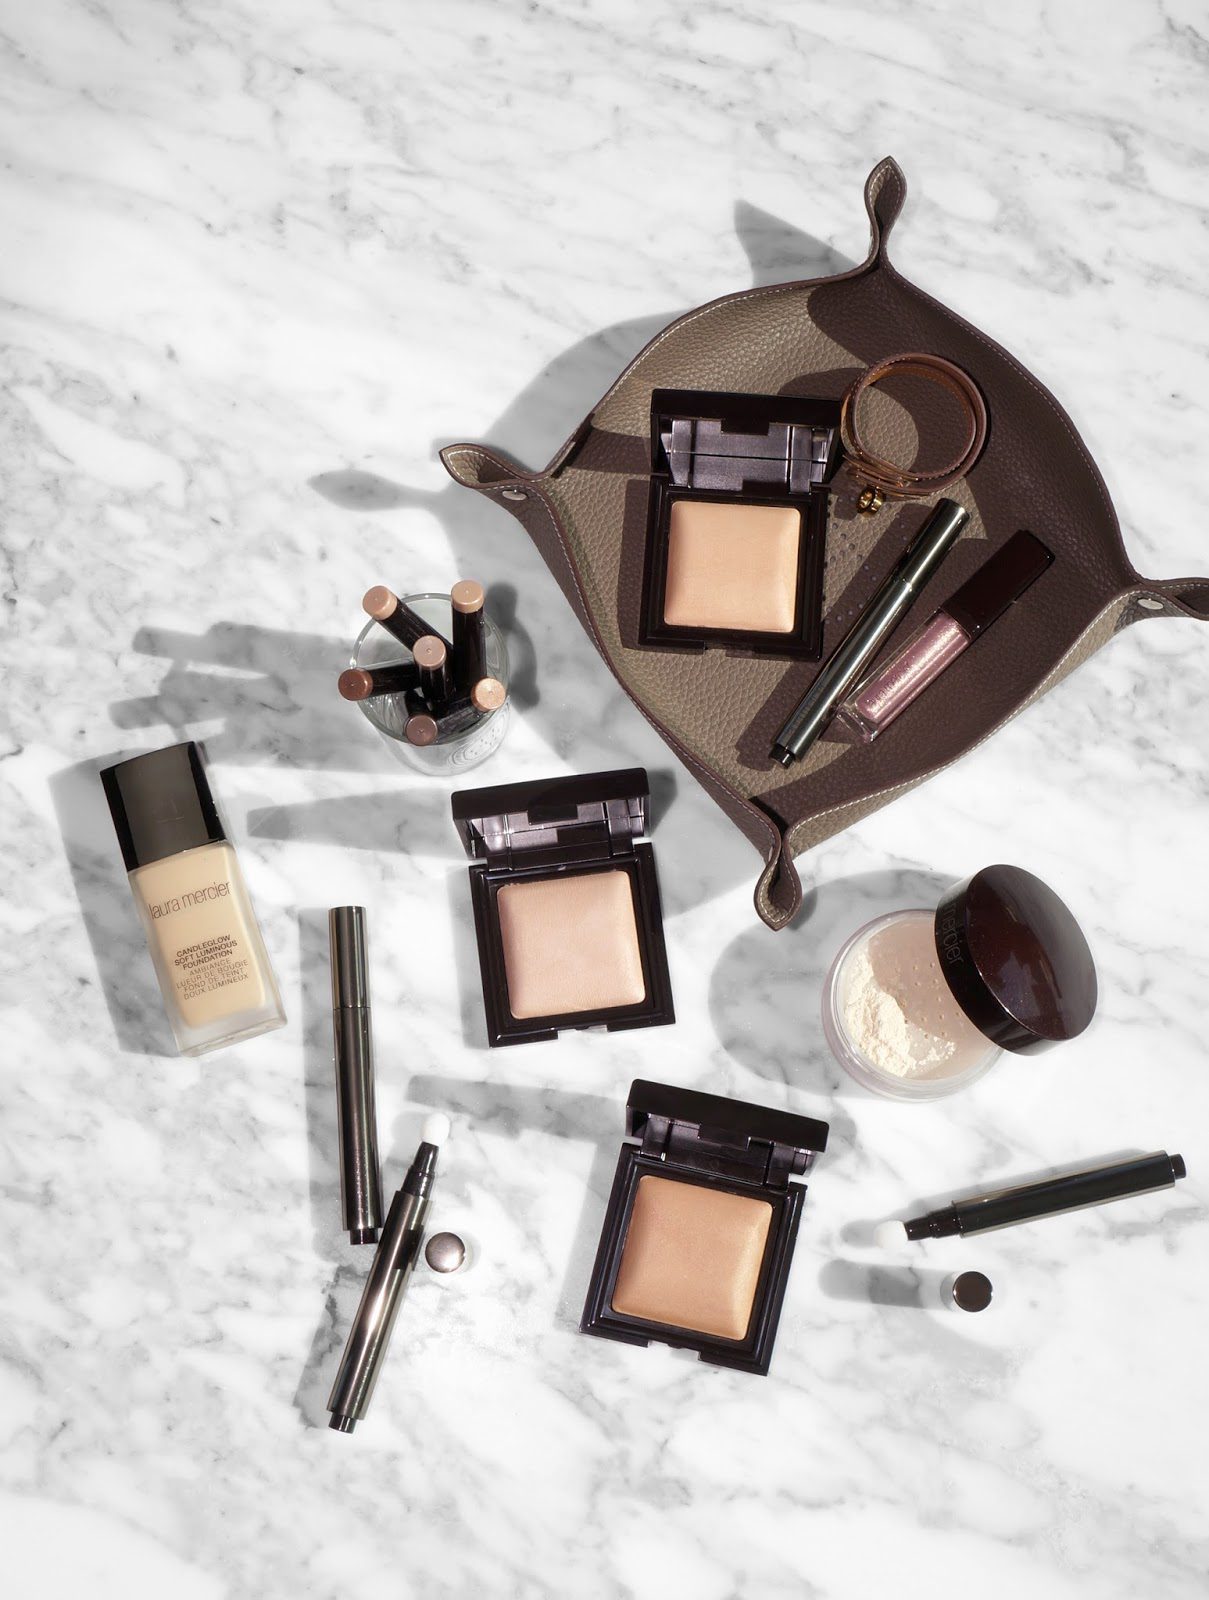 Laura Mercier Candleglow Sheer Perfecting Powder and Candleglow Concealer and Highlighter